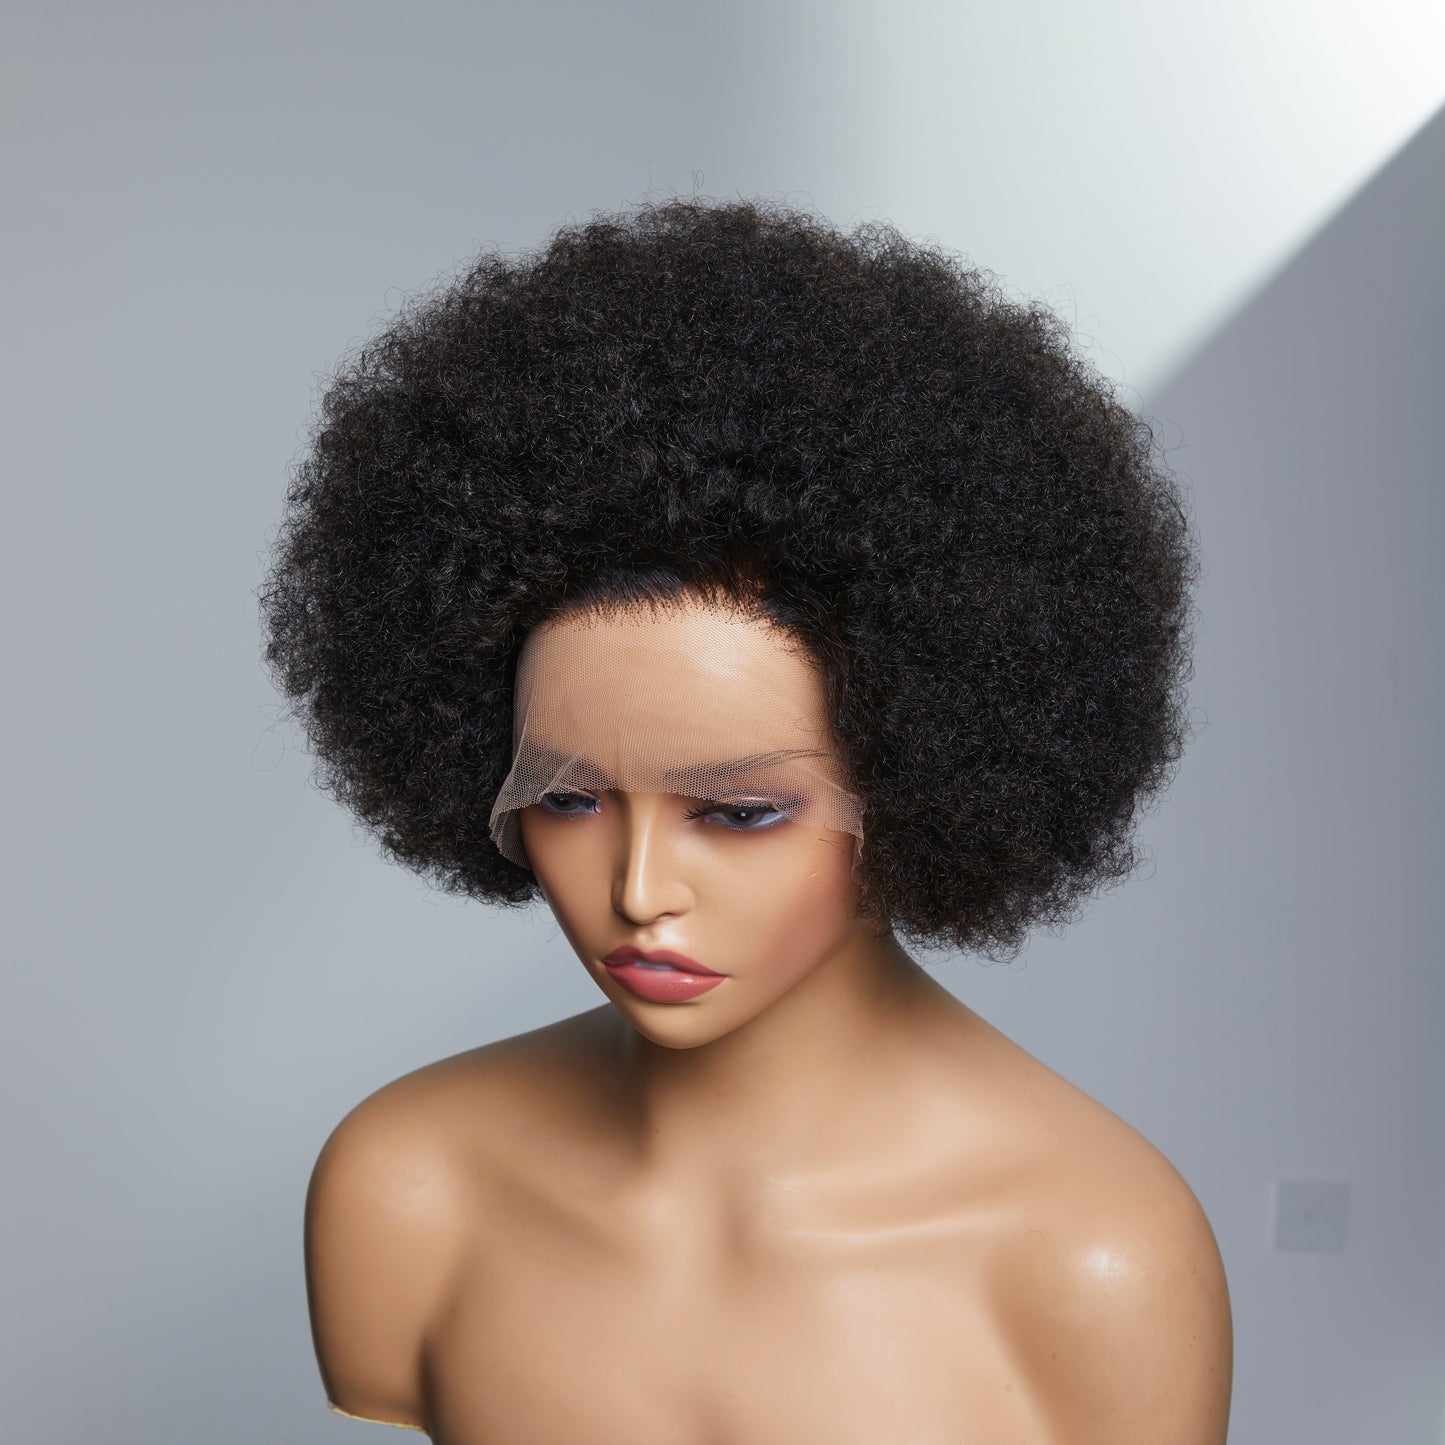 Retro & Vintage | Ultra Natural Afro Curl 5x5 Frontal Lace Short Wig 100% Human Hair